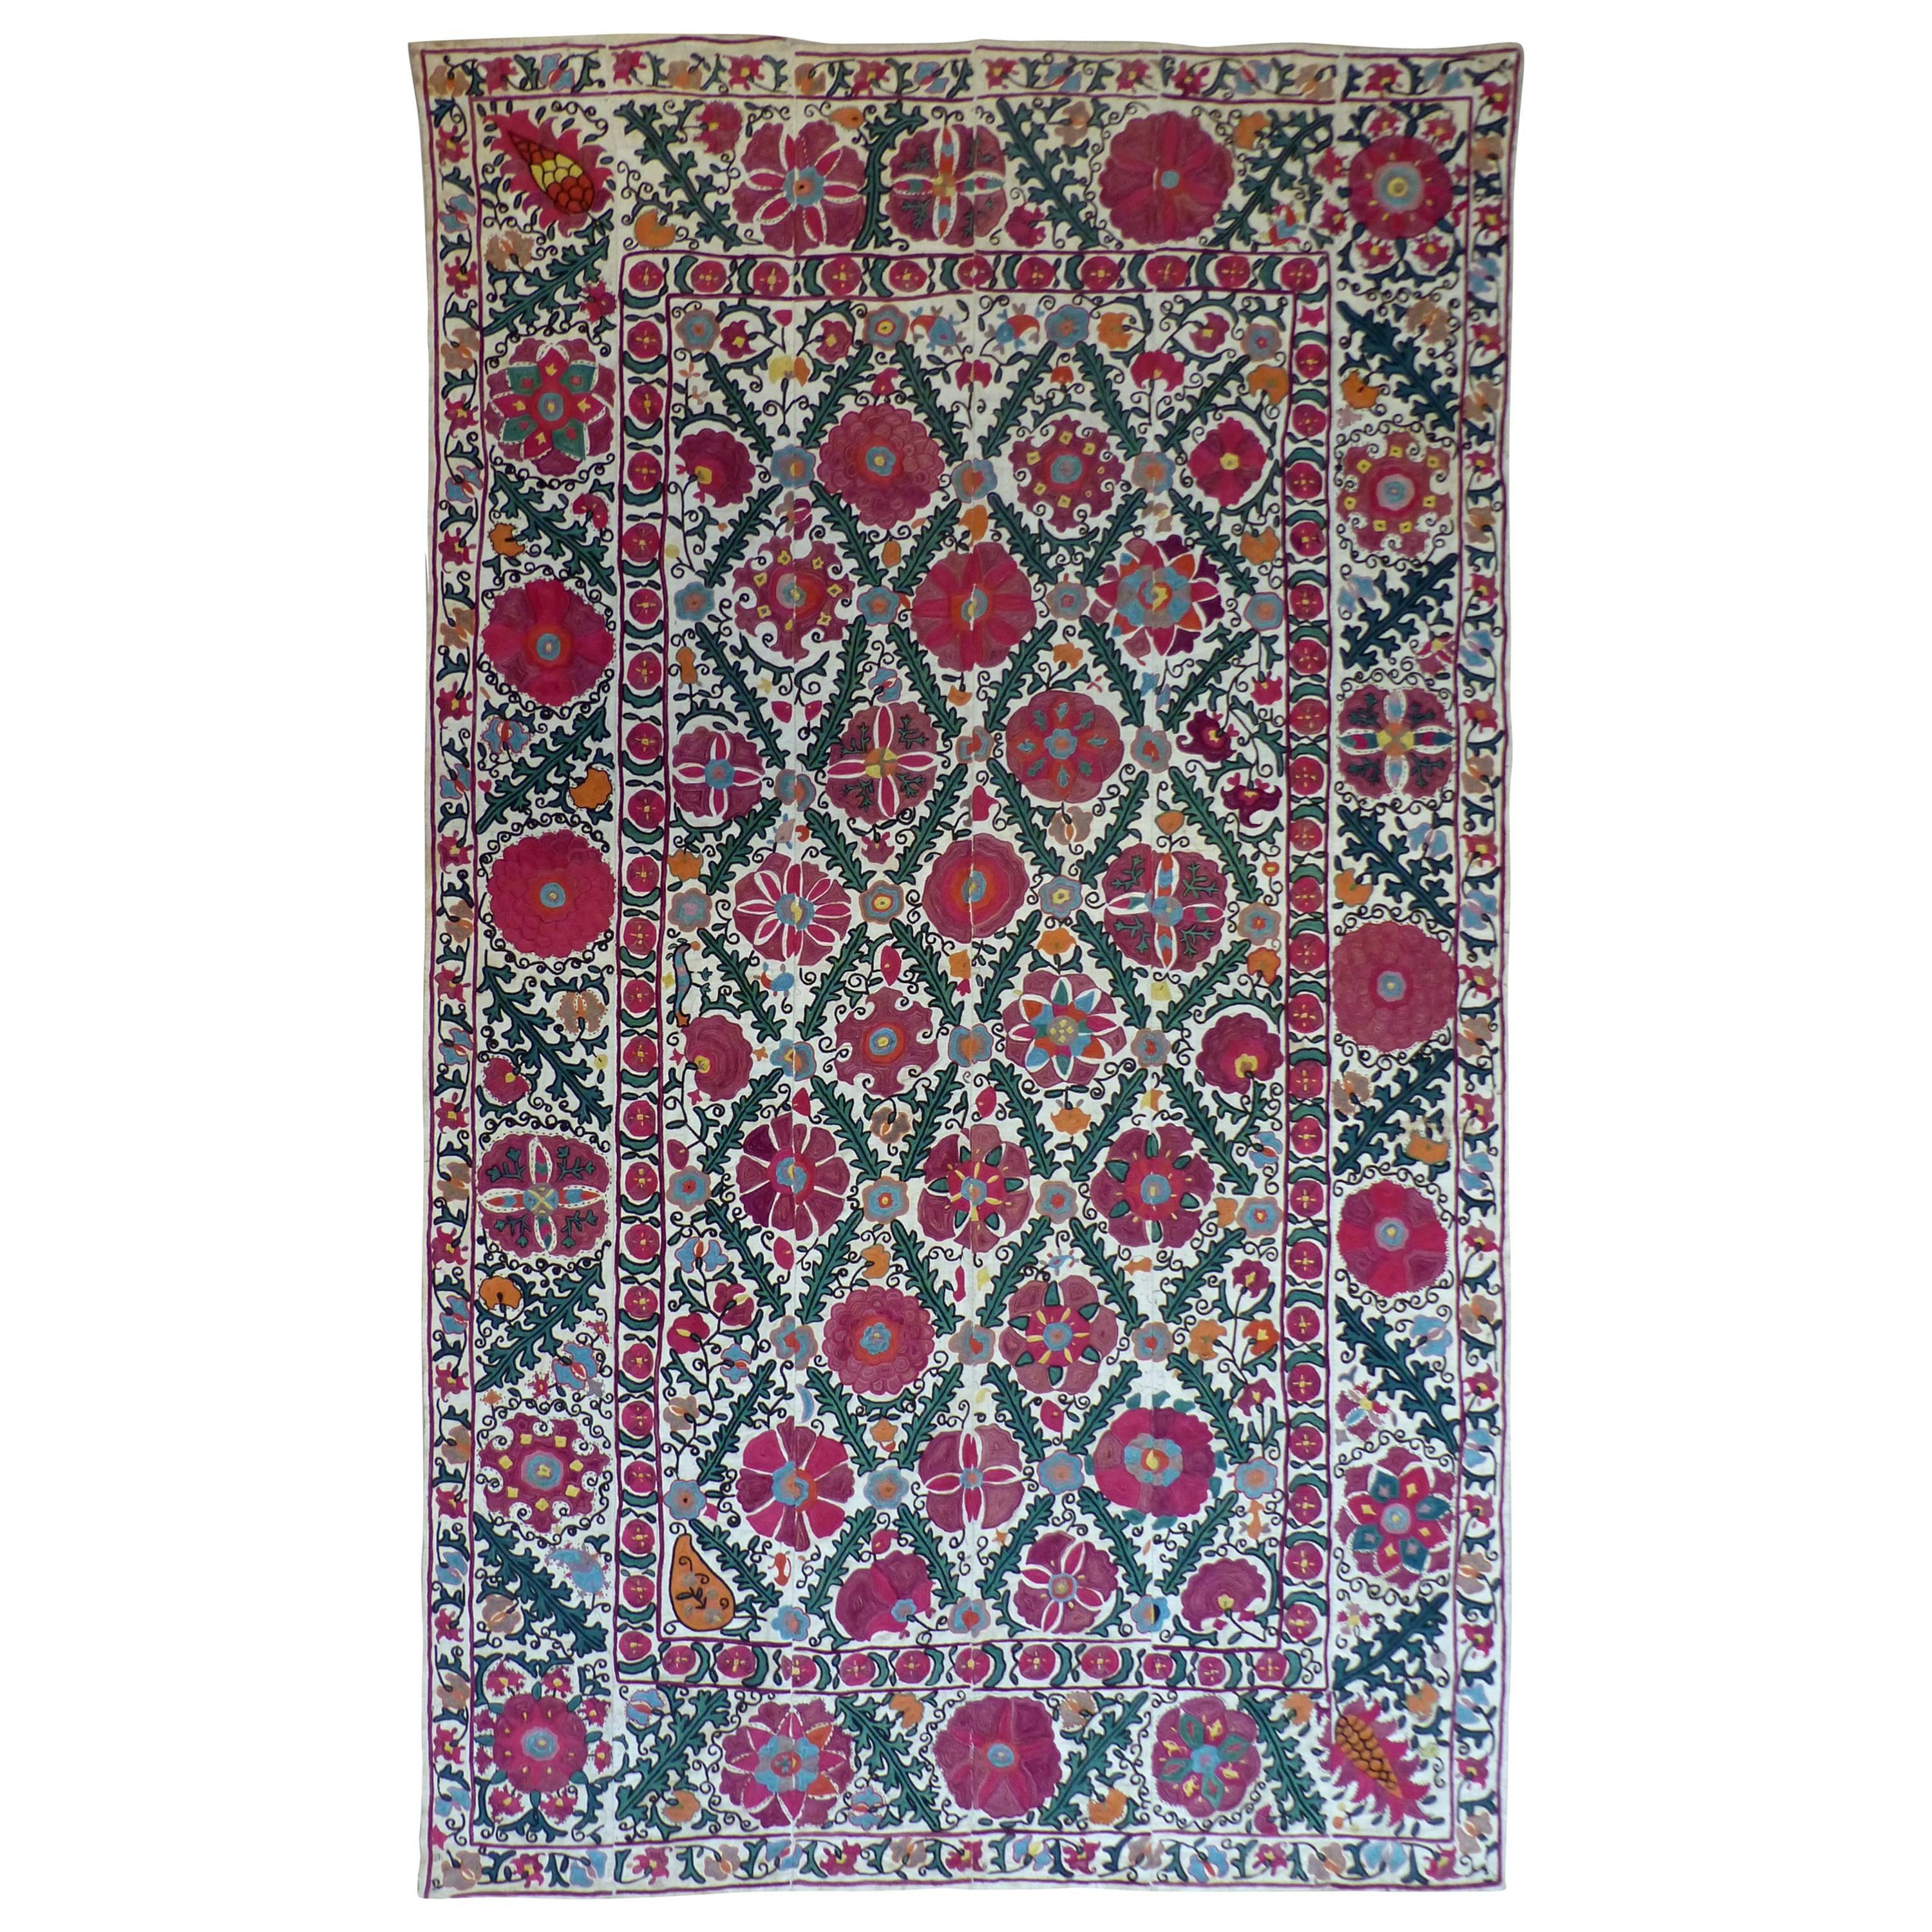 Suzani Antique Embroidery from Central Asia